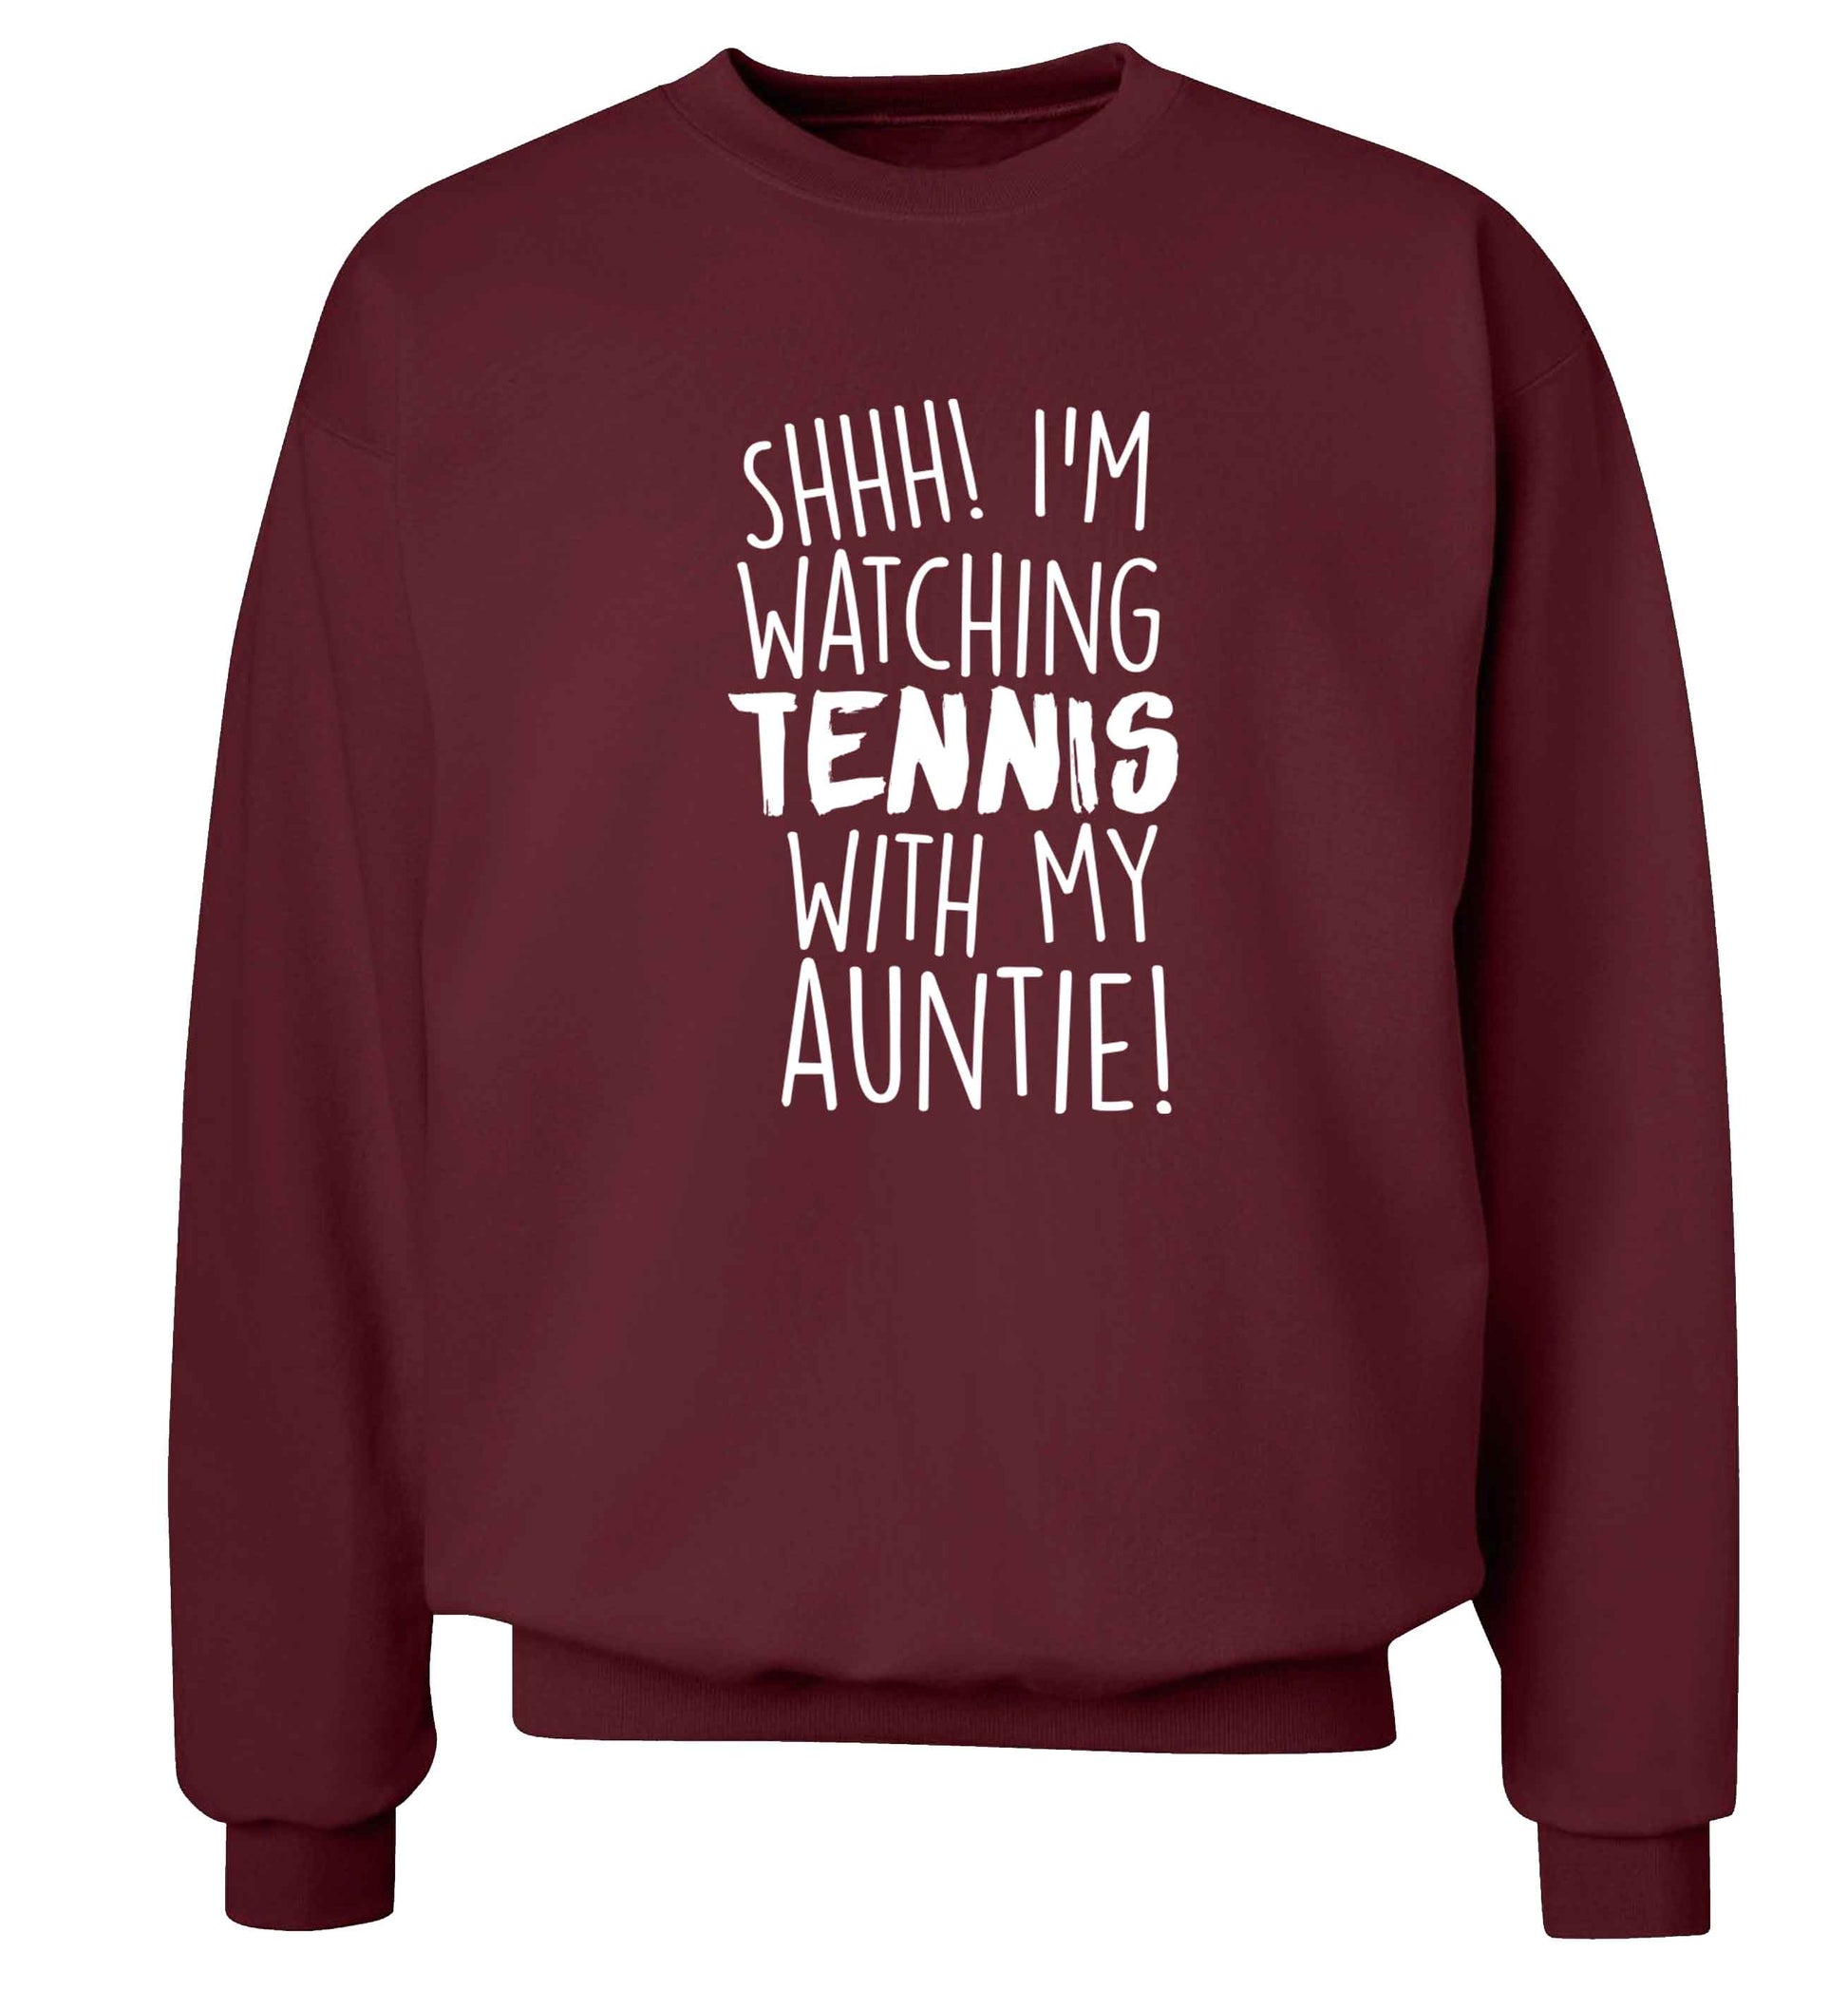 Shh! I'm watching tennis with my auntie! Adult's unisex maroon Sweater 2XL